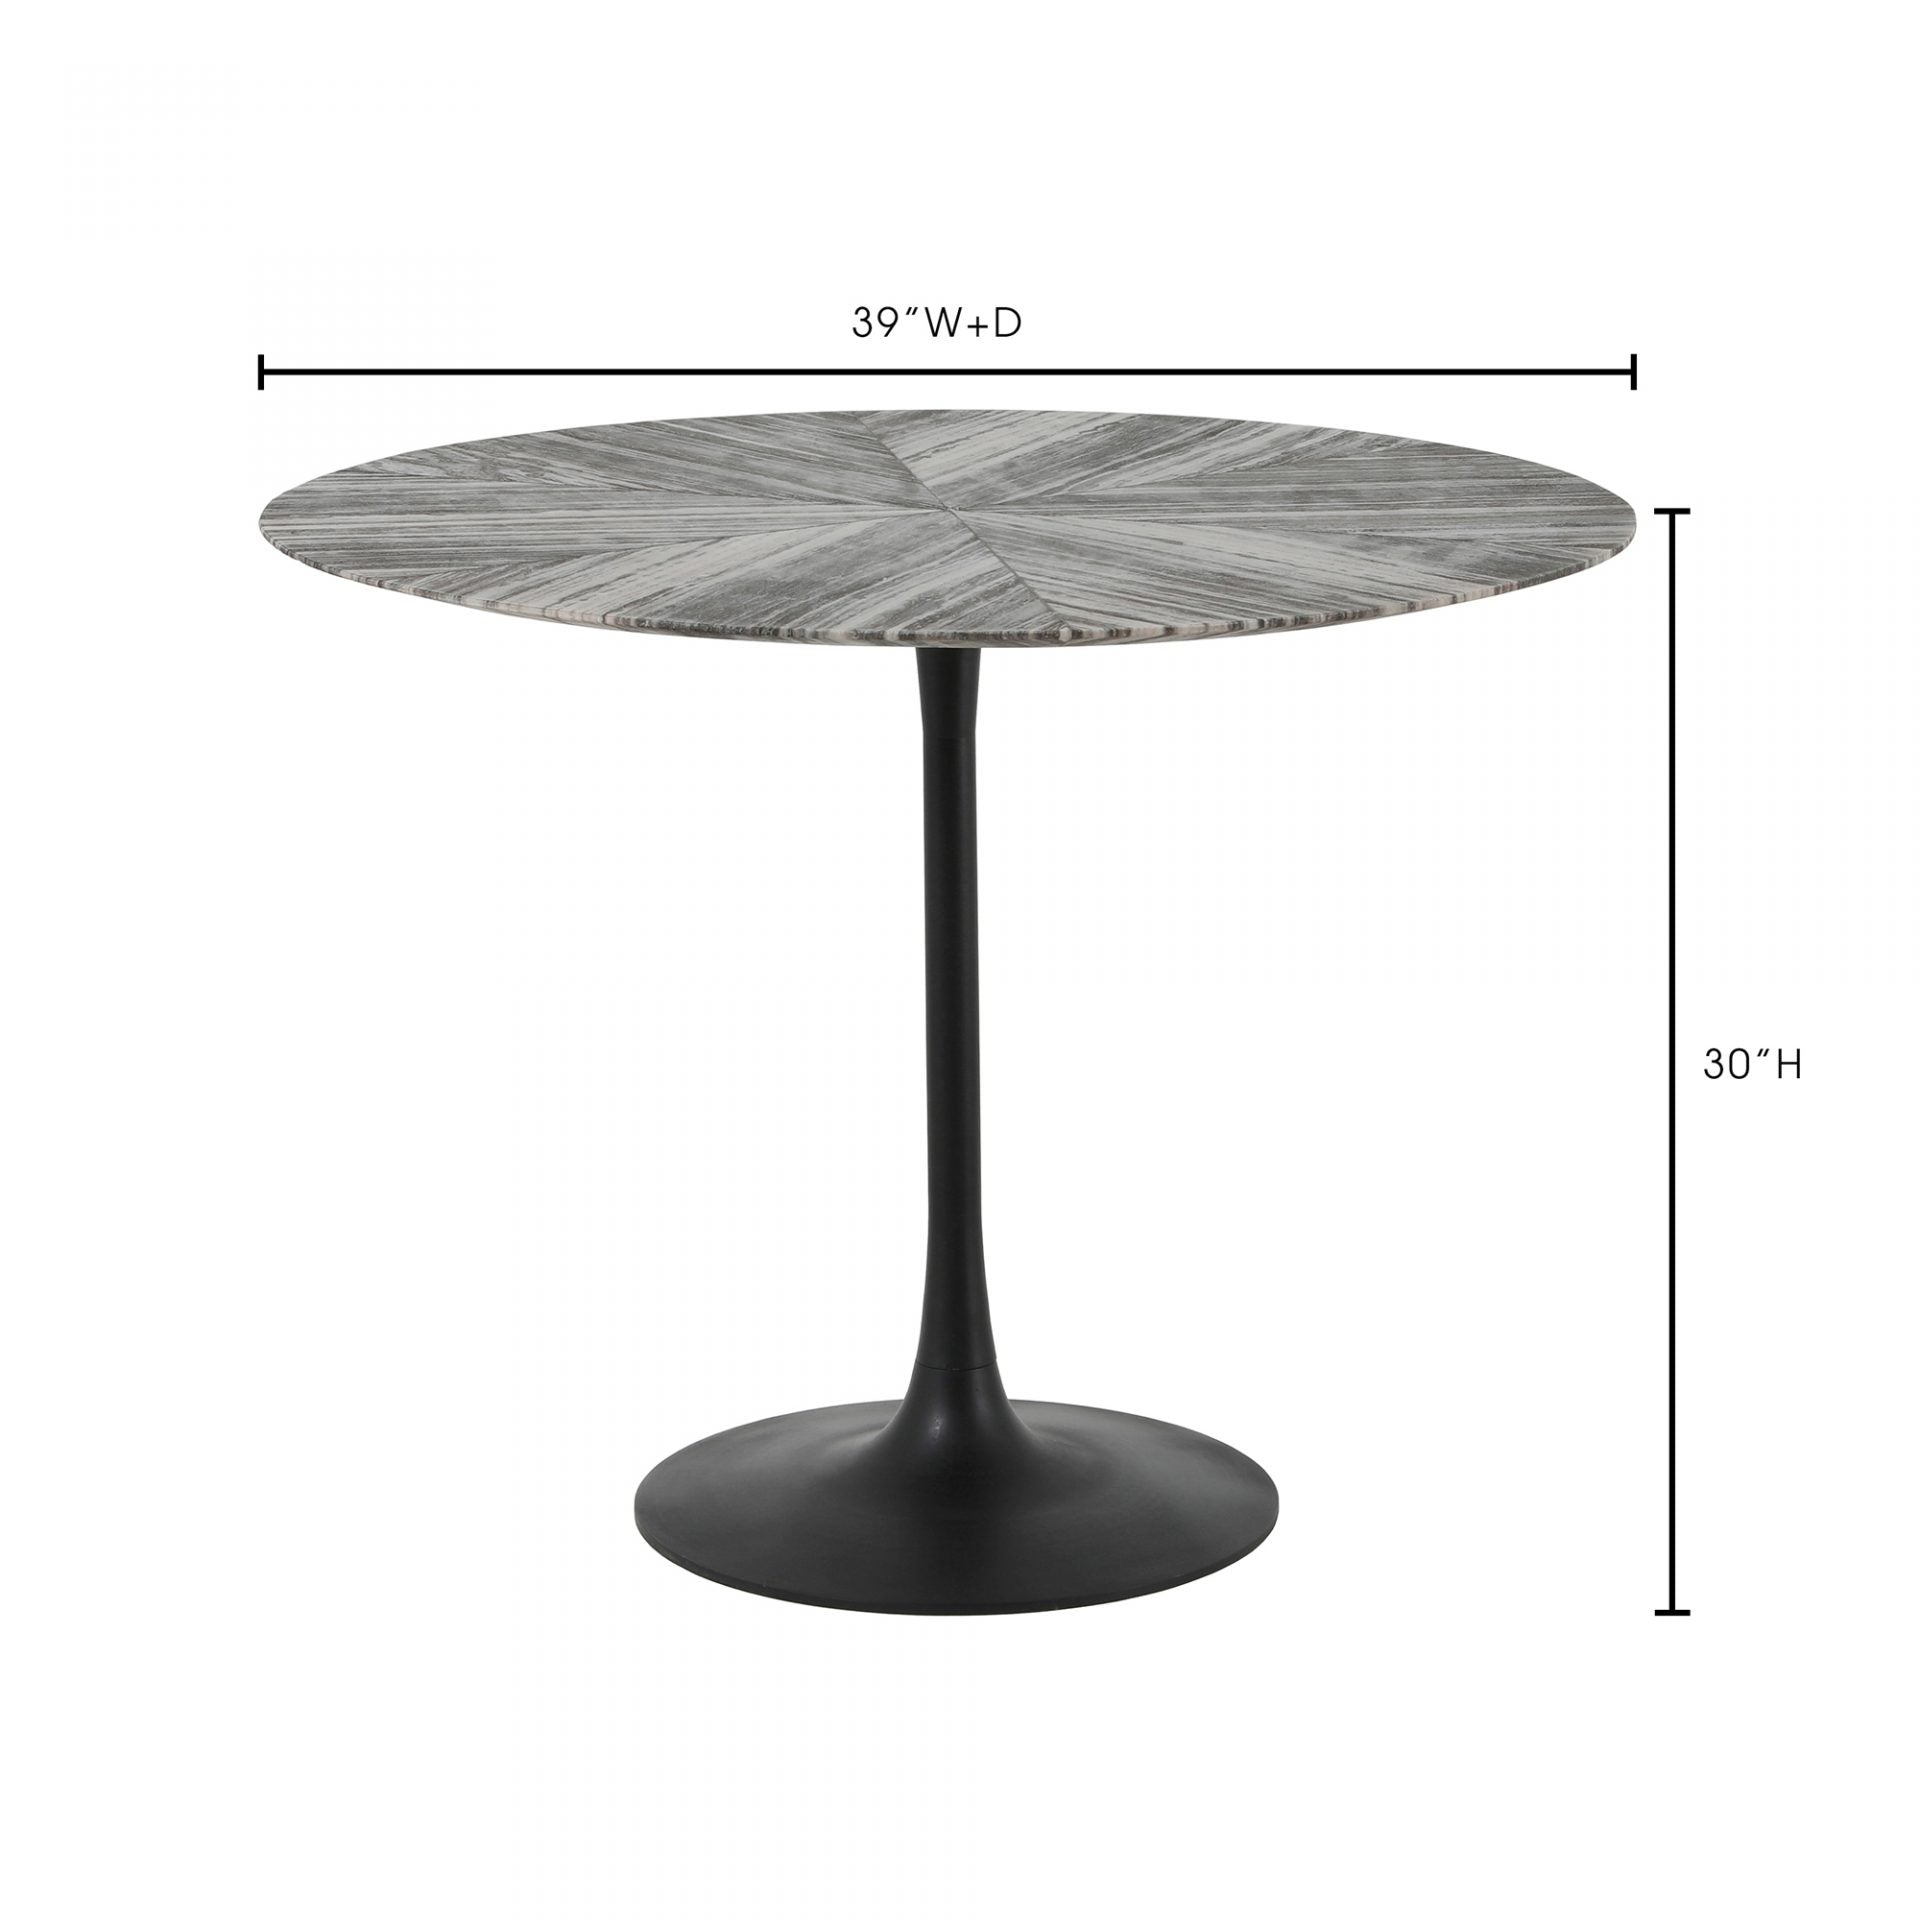 Nyles Marble Dining Table